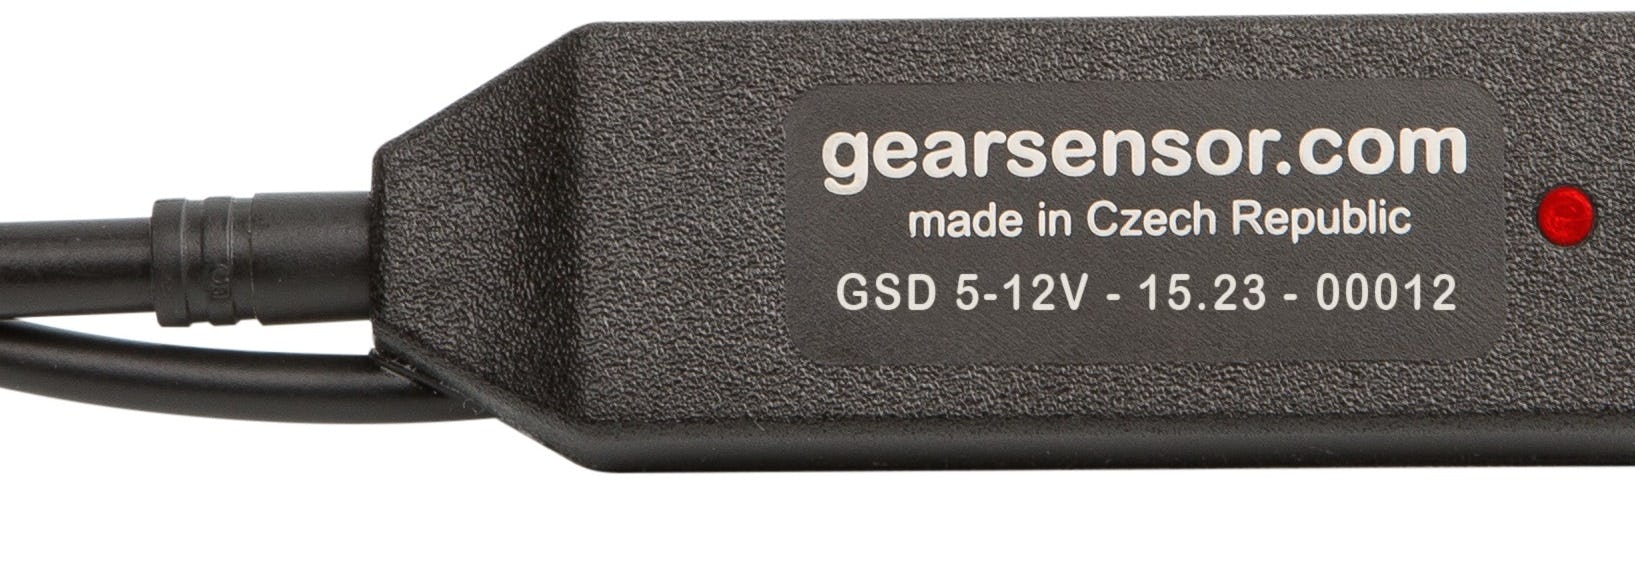 Gearsensor.com continues to works on expanding compatibility further with other European, US and Asian manufacturers of mid-drive units. – Photo Gearsensor.com